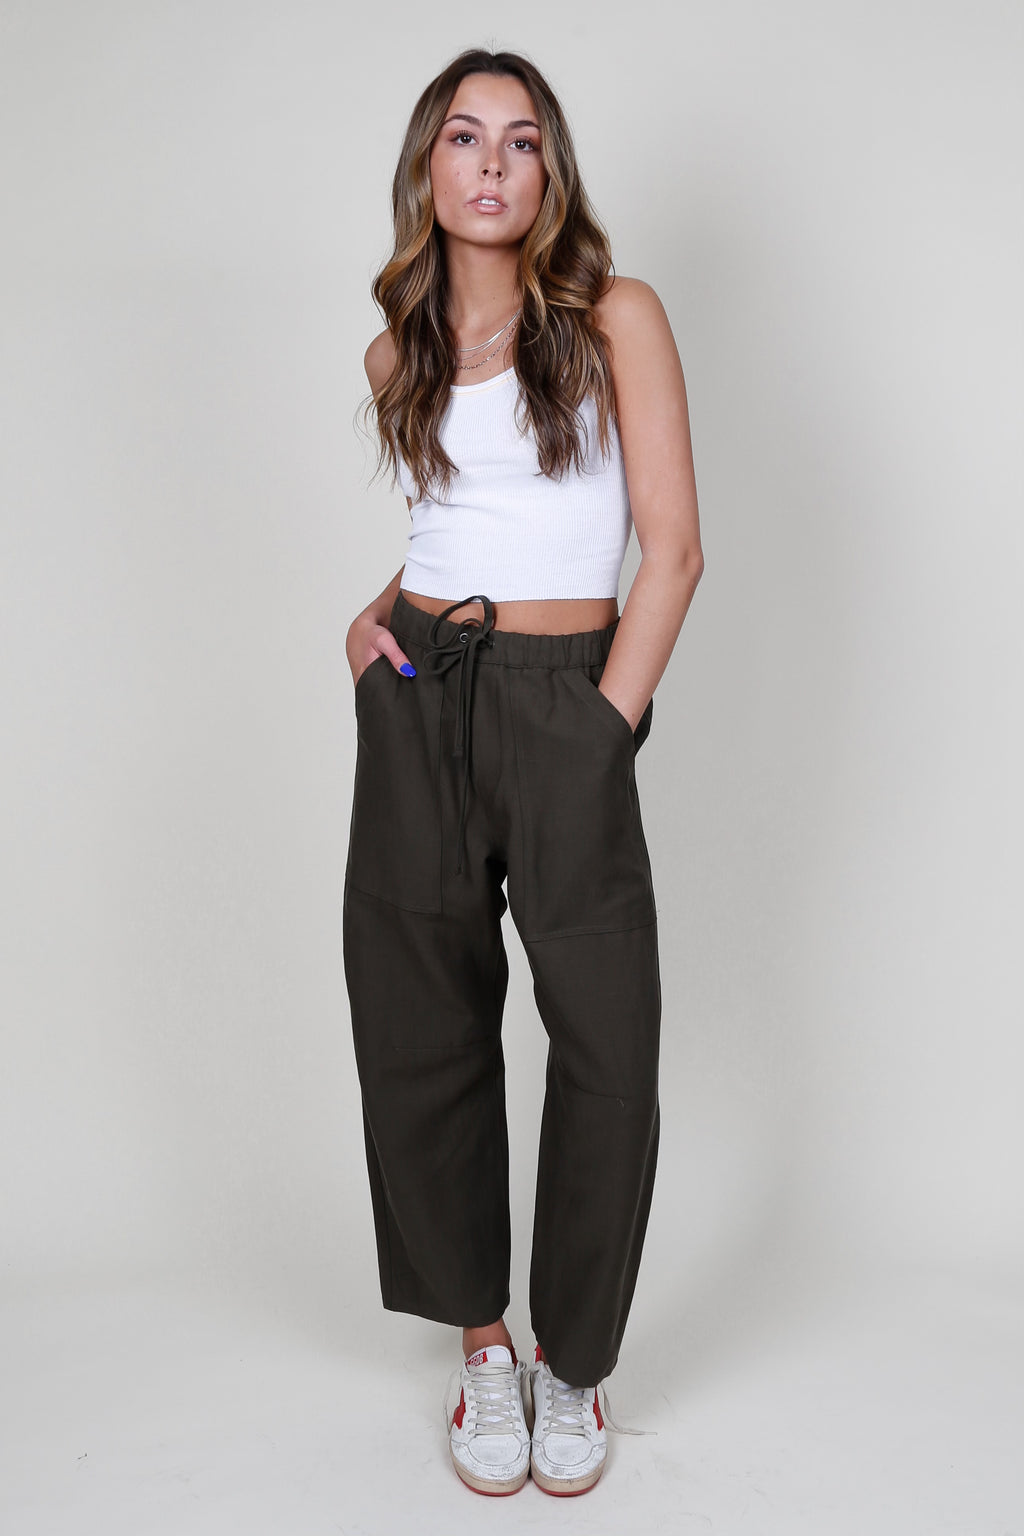 ENZA COSTA | Twill Utility Pant - Military